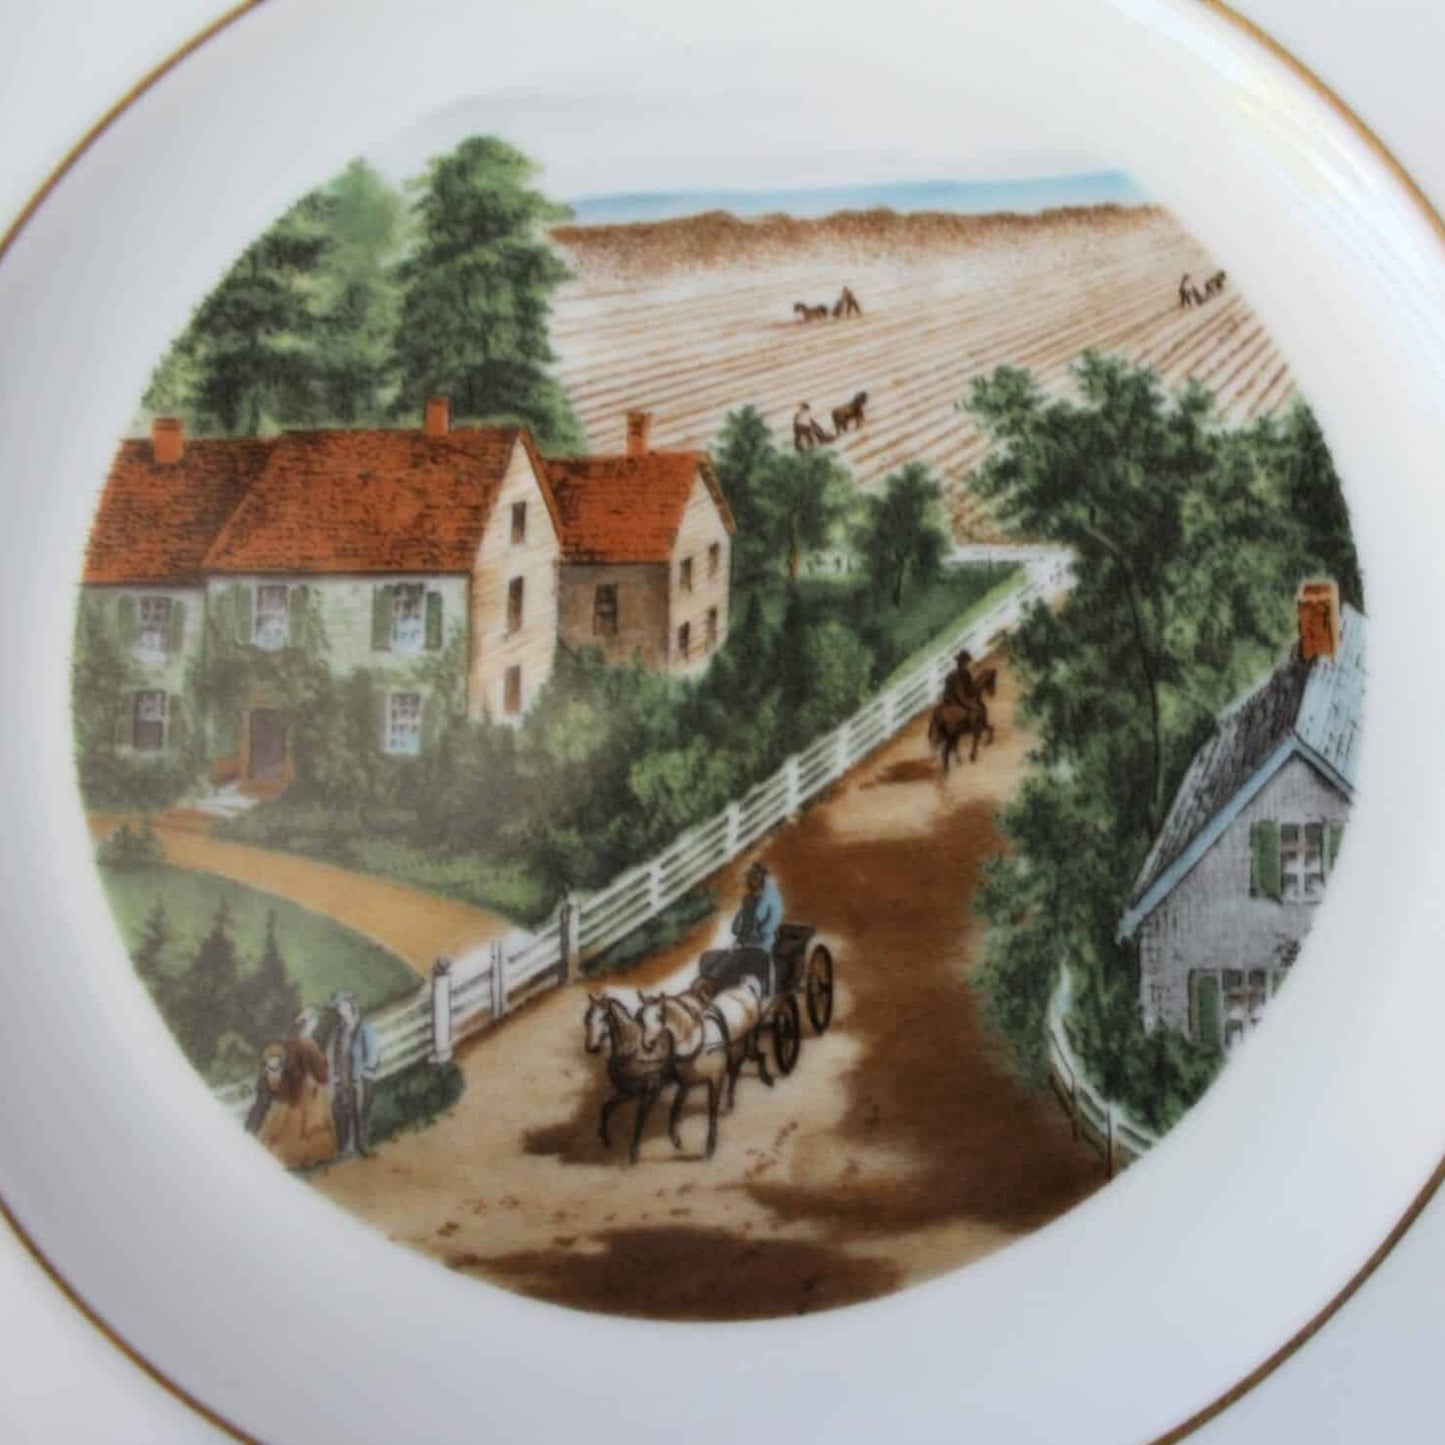 Decorative Plate, Bing & Grondahl, Currier & Ives, The Western Farmer's Home, Vintage